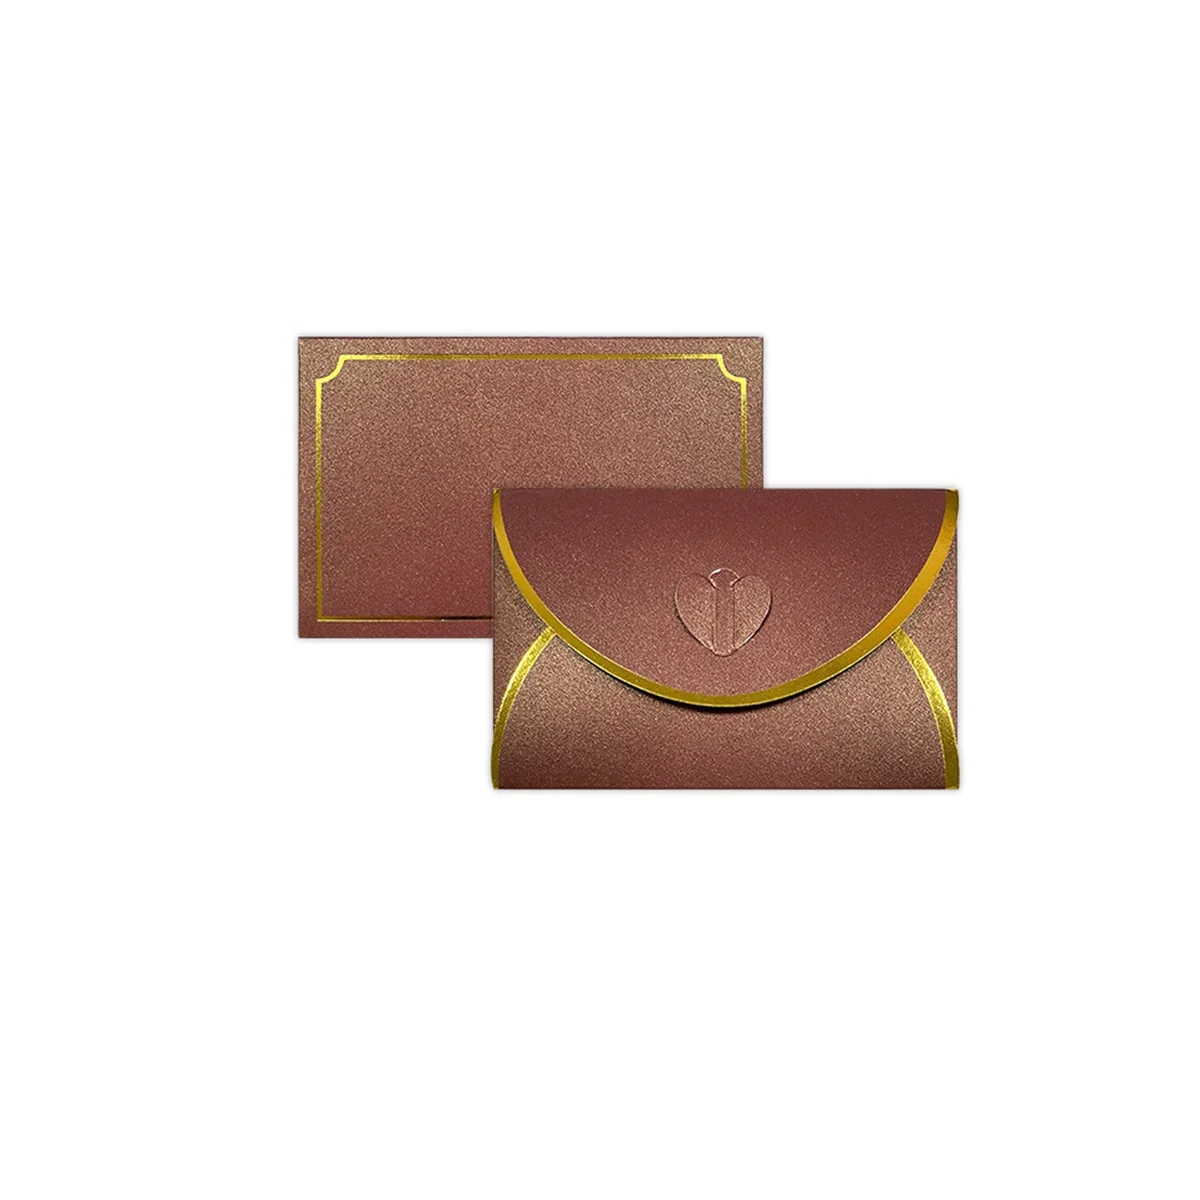 

50Pcs Gift Card Envelopes with Love Buckle Envelopes with Gold Border, Envelope for Note Cards, Wedding Copper